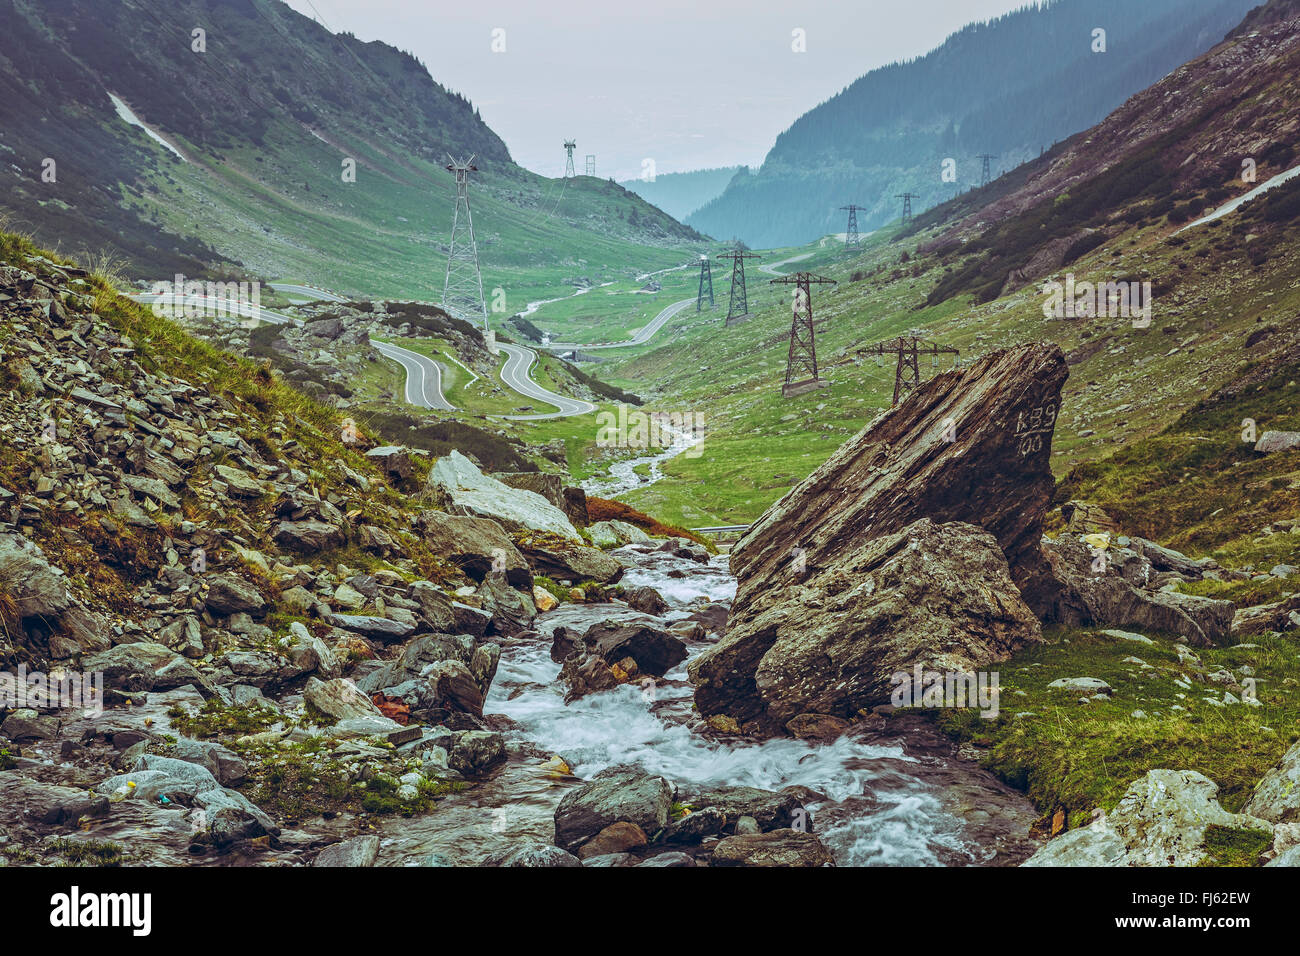 Scenic vista with fresh water stream rapids flowing along the famous sinuous Transfagarasan road in Fagaras mountains, Romania. Stock Photo